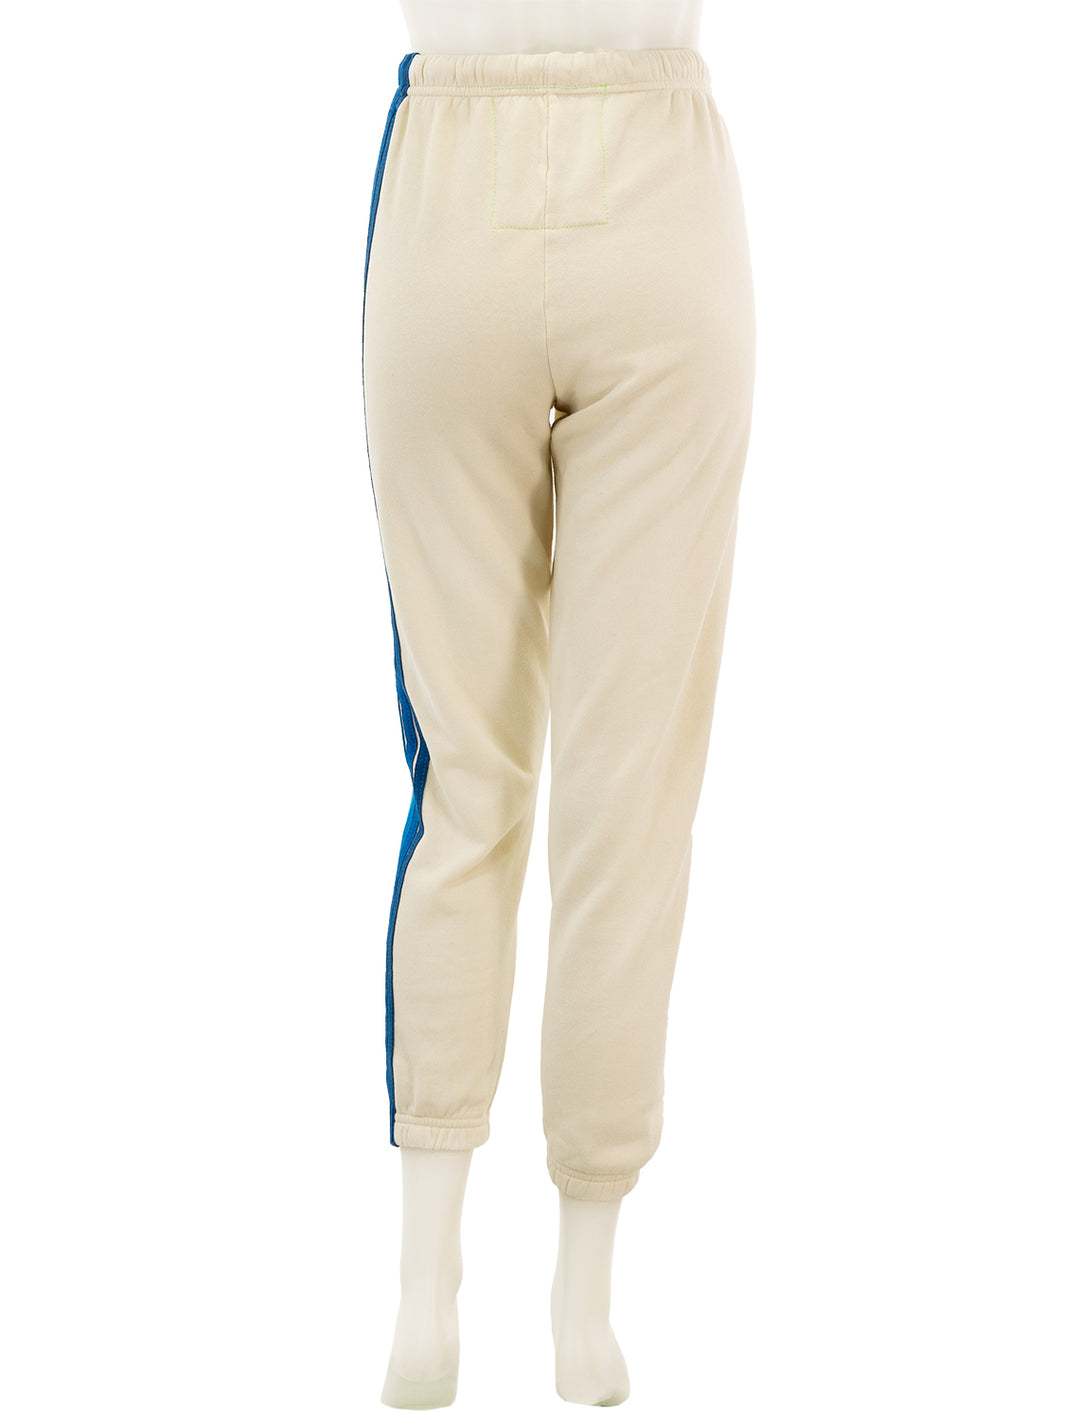 Back view of Aviator Nation's 5 stripe womens sweatpants in vintage white and blue.